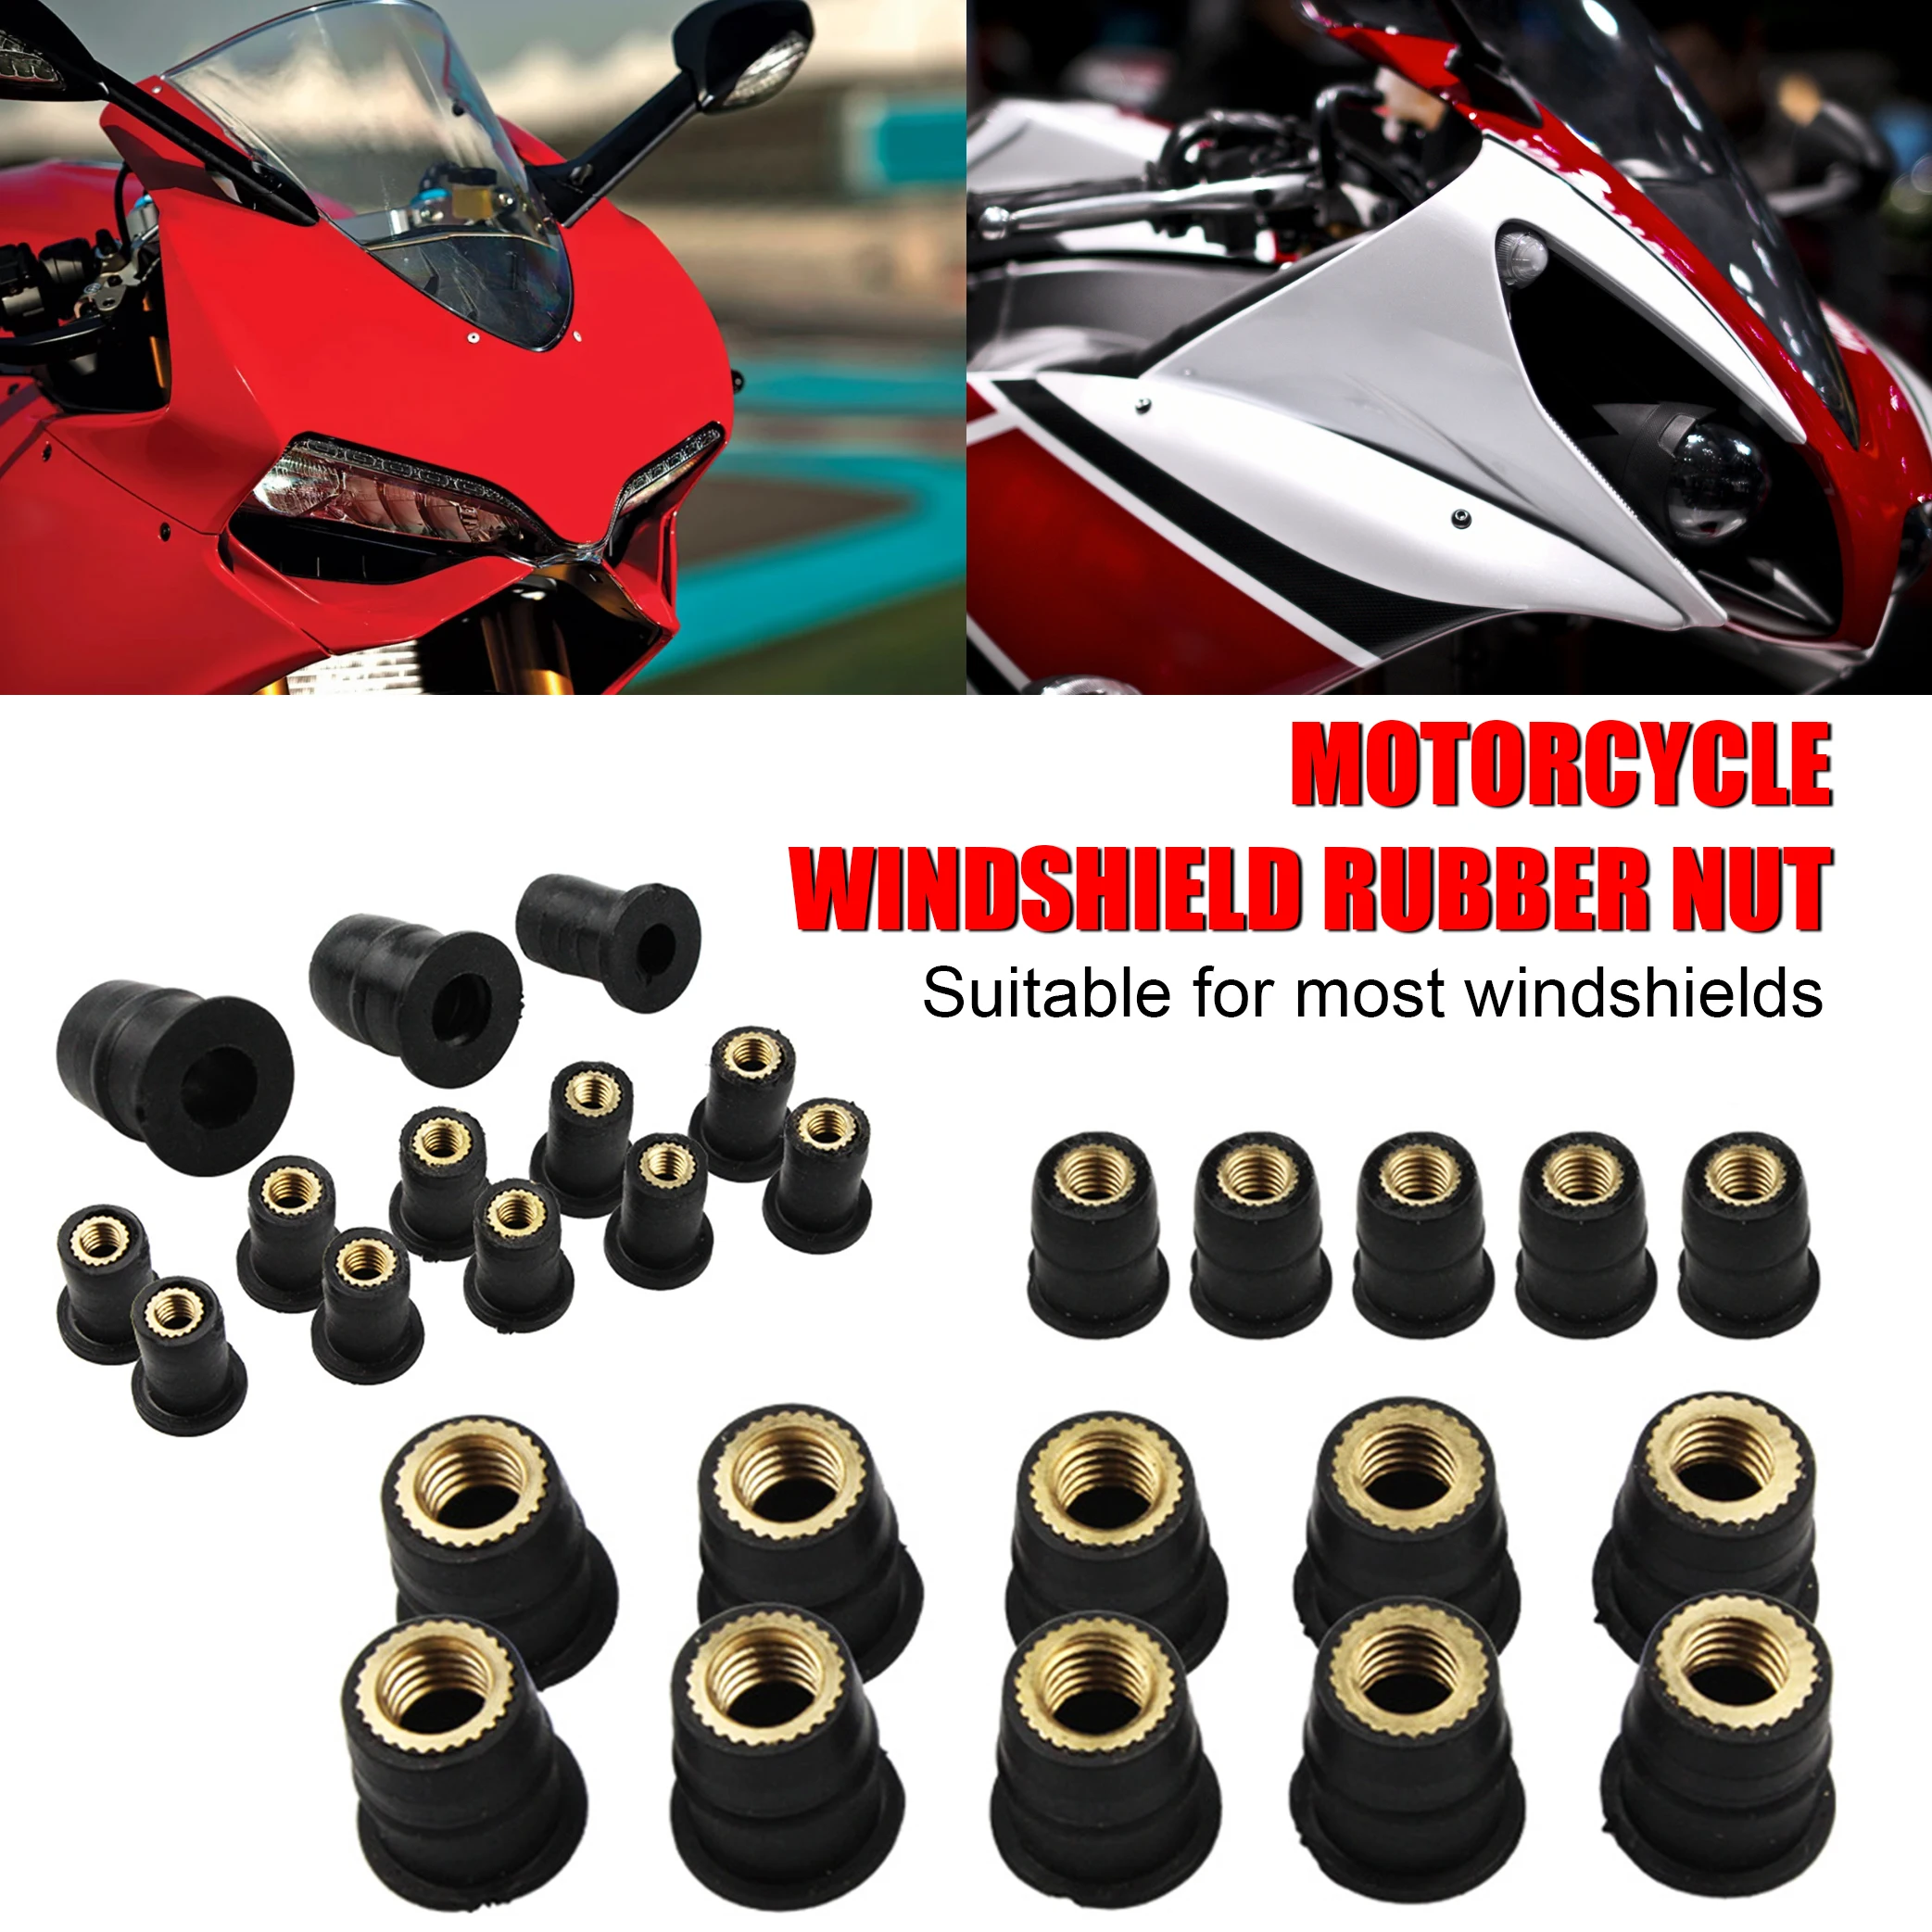 

10Pcs Motorcycle Windshield Nuts M4 M5 M6 Rubber Windshield Fairing Bolt Nut Fastener Universal Motorcycle Accessories